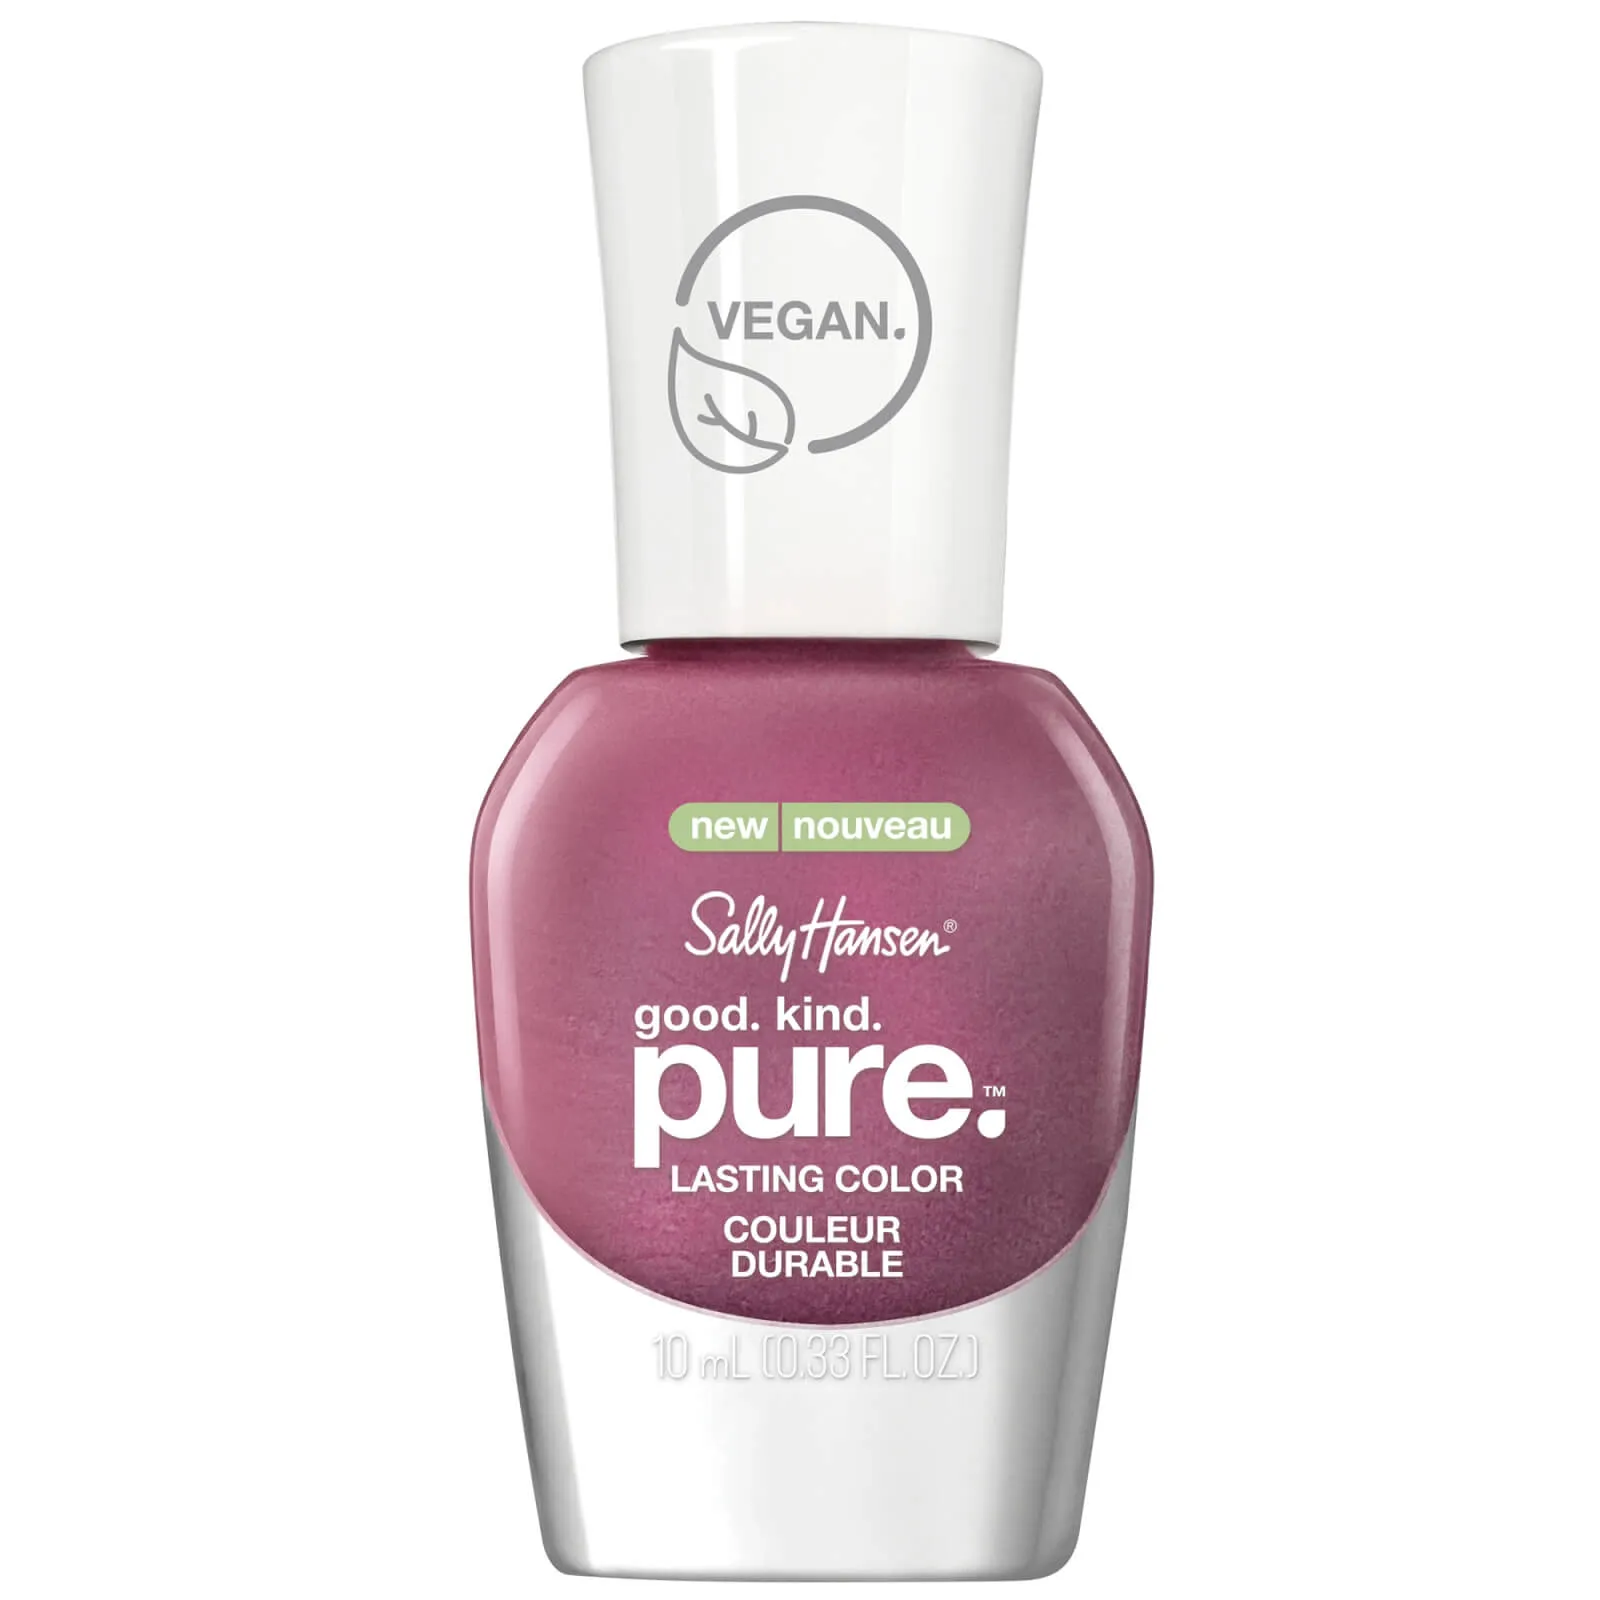  Good.Kind.Pure Nail Poli Lacquer – 331 – Frosted Amethyst, 10ml